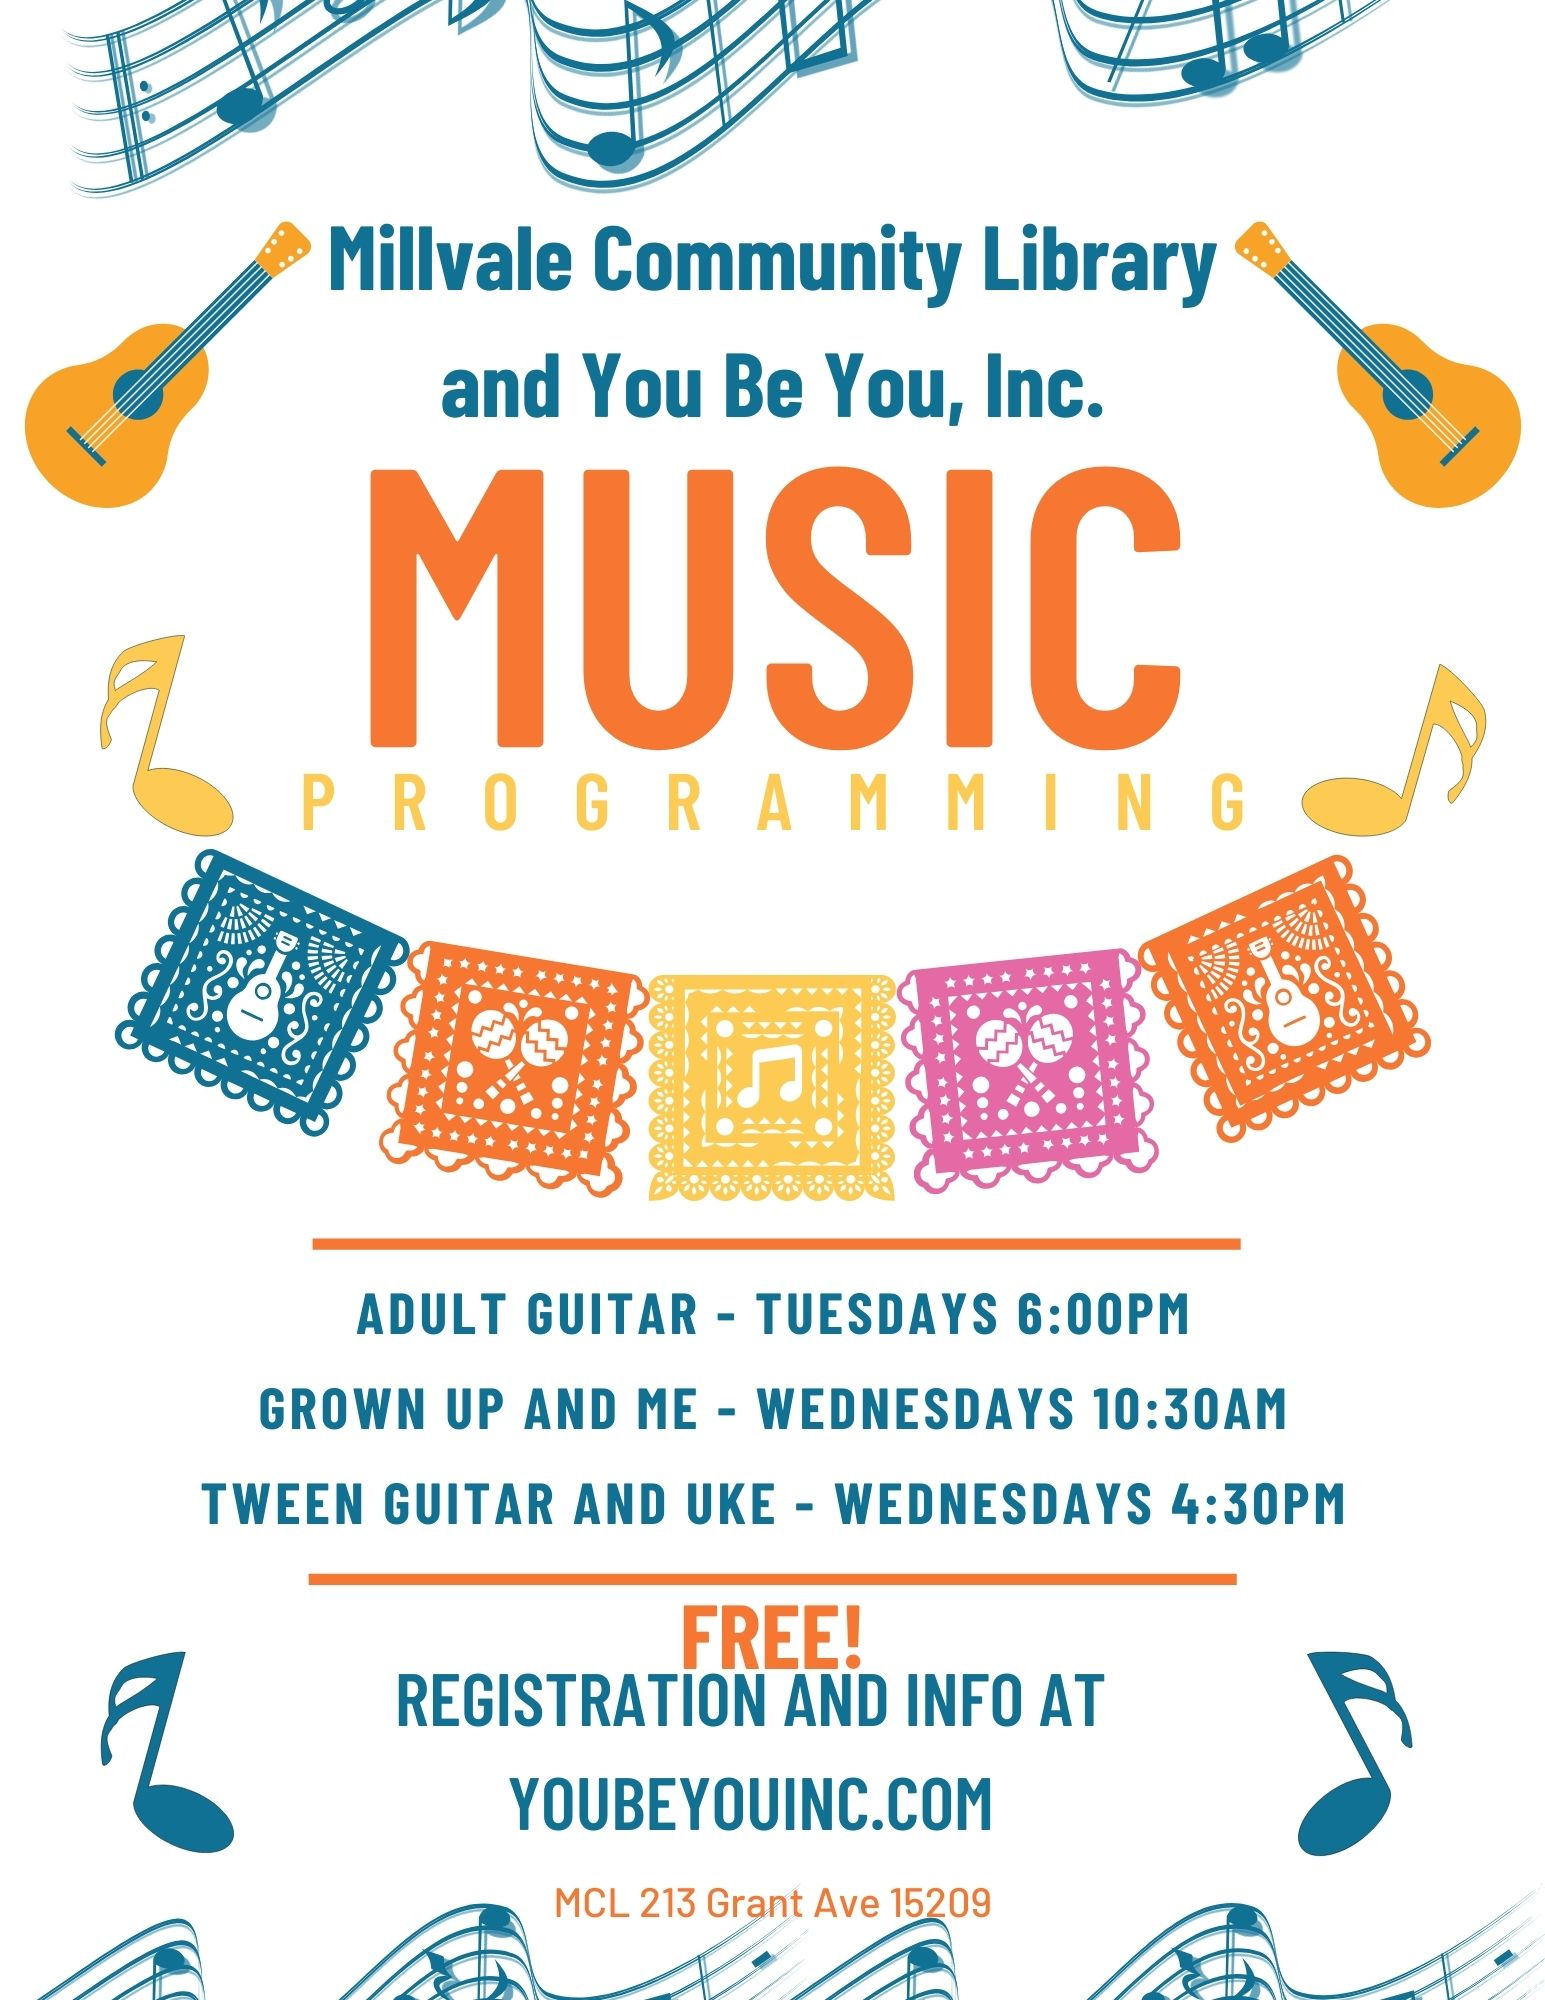 A colorful flyer outlining You Be You and Millvale Library's music programming